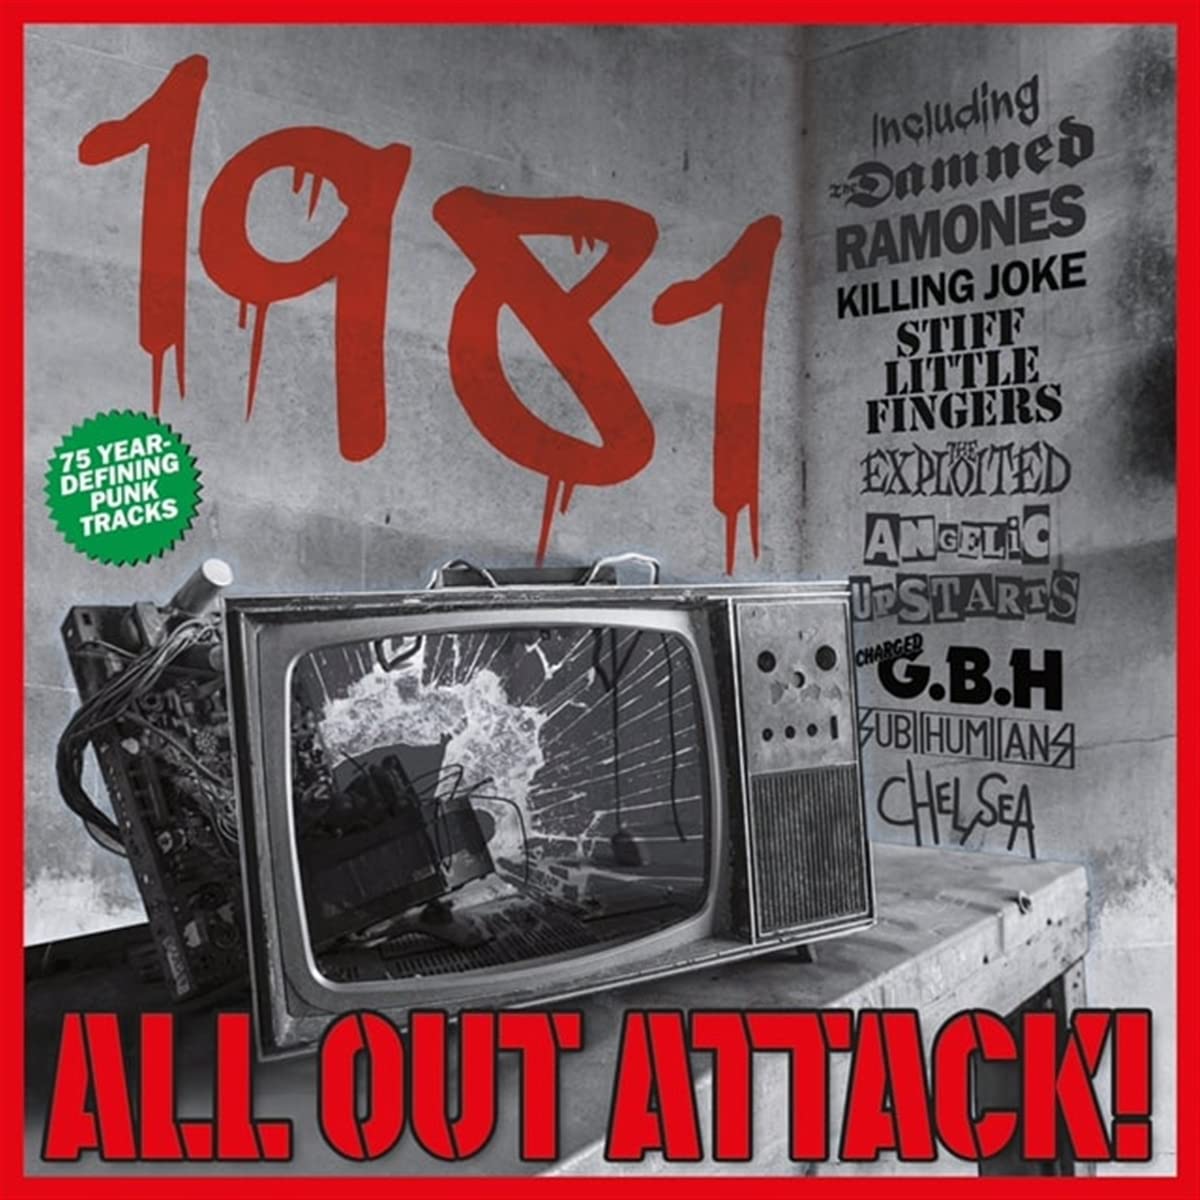 1981 All Out Attack!